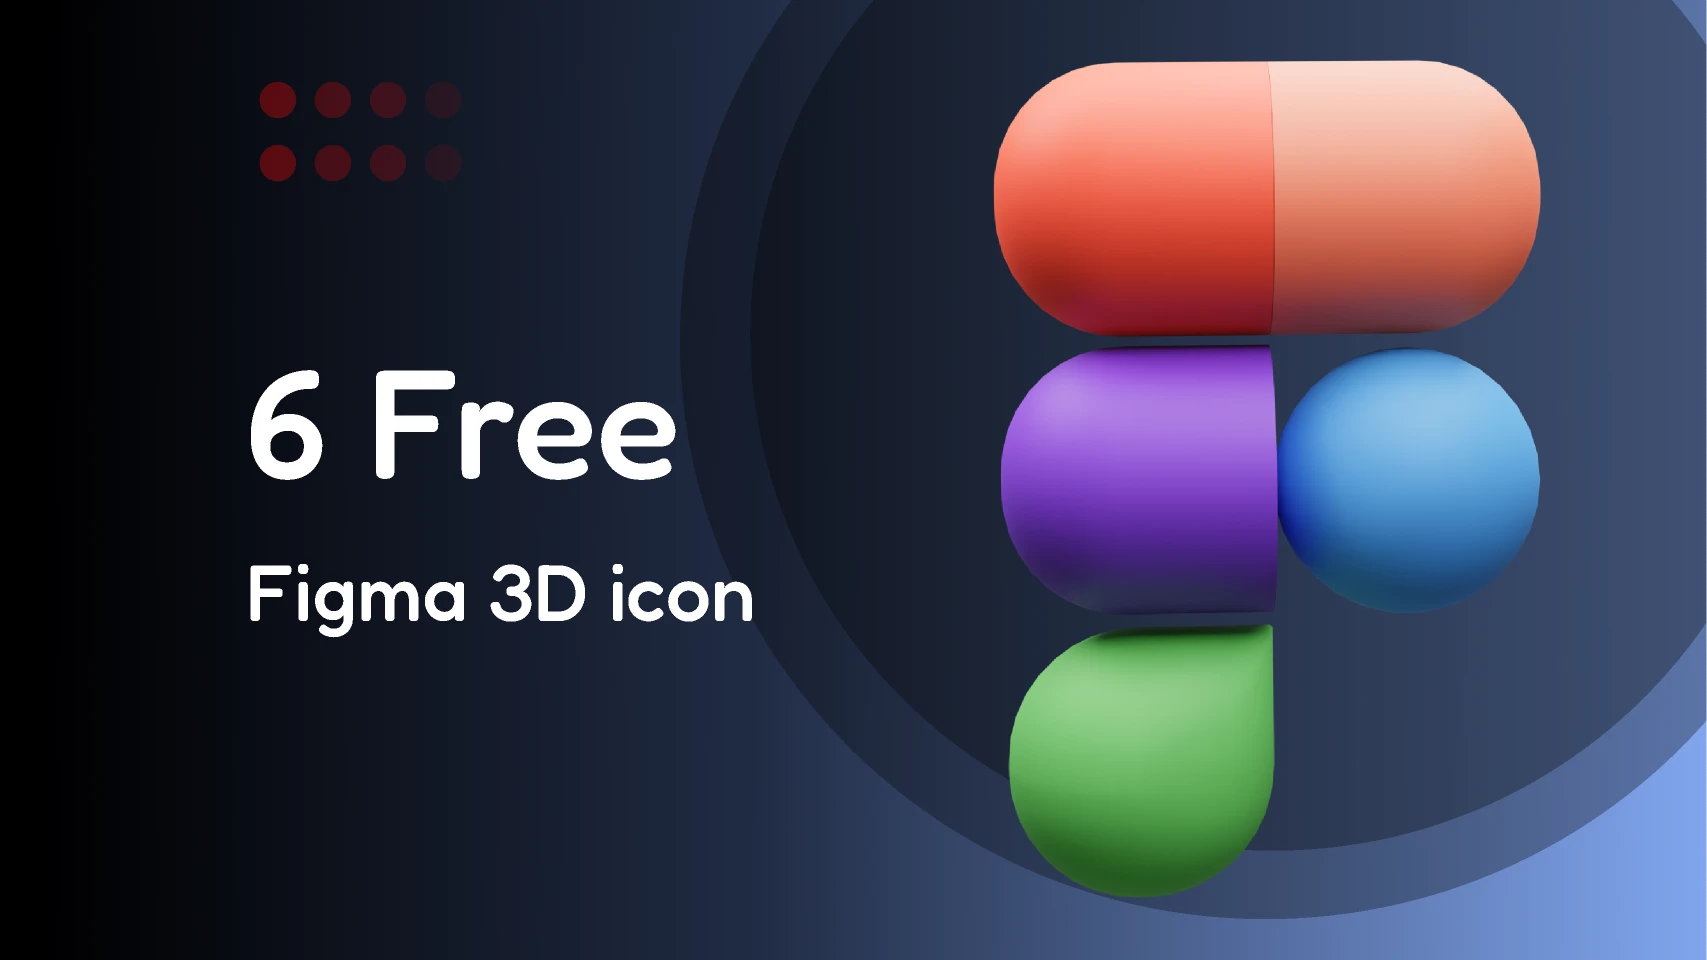 3D Figma icon for Figma and Adobe XD